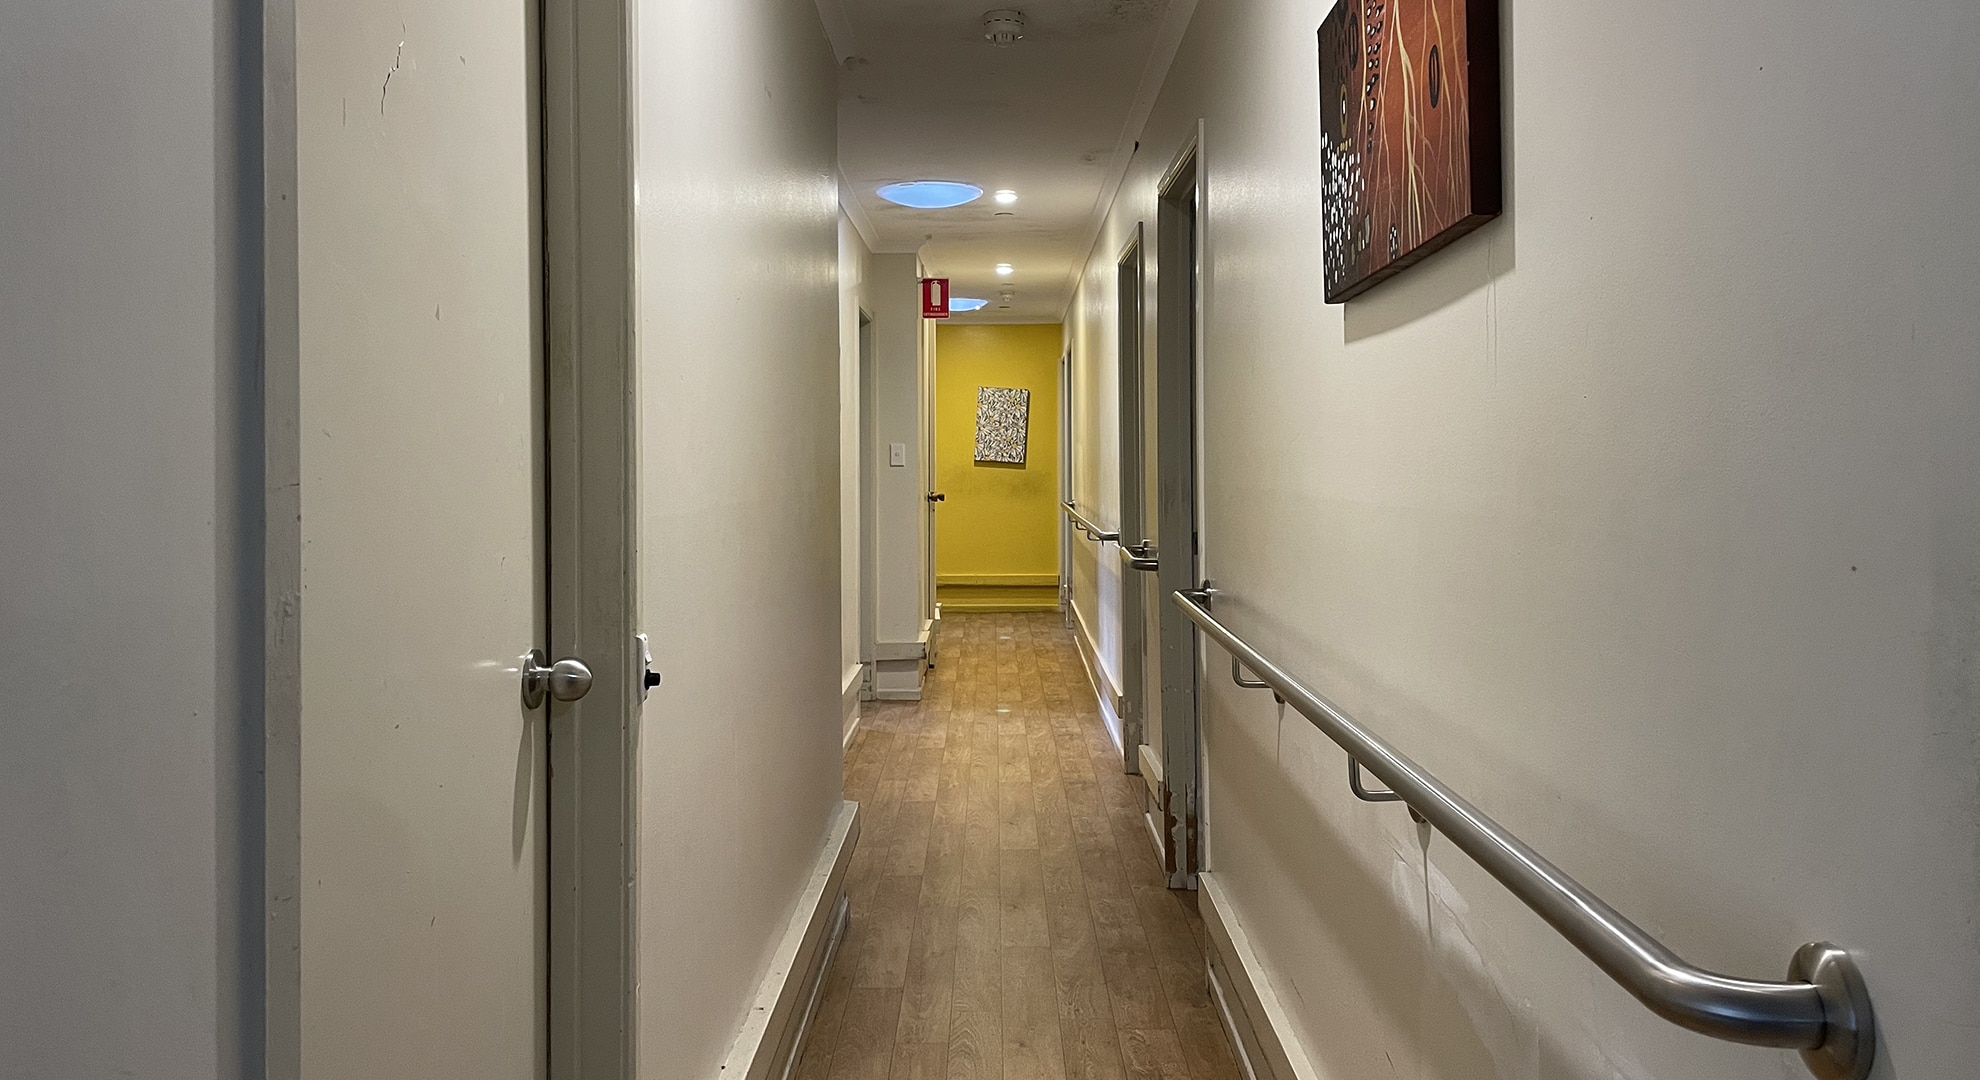 The view down a hallway with handrails and wooden floorboards